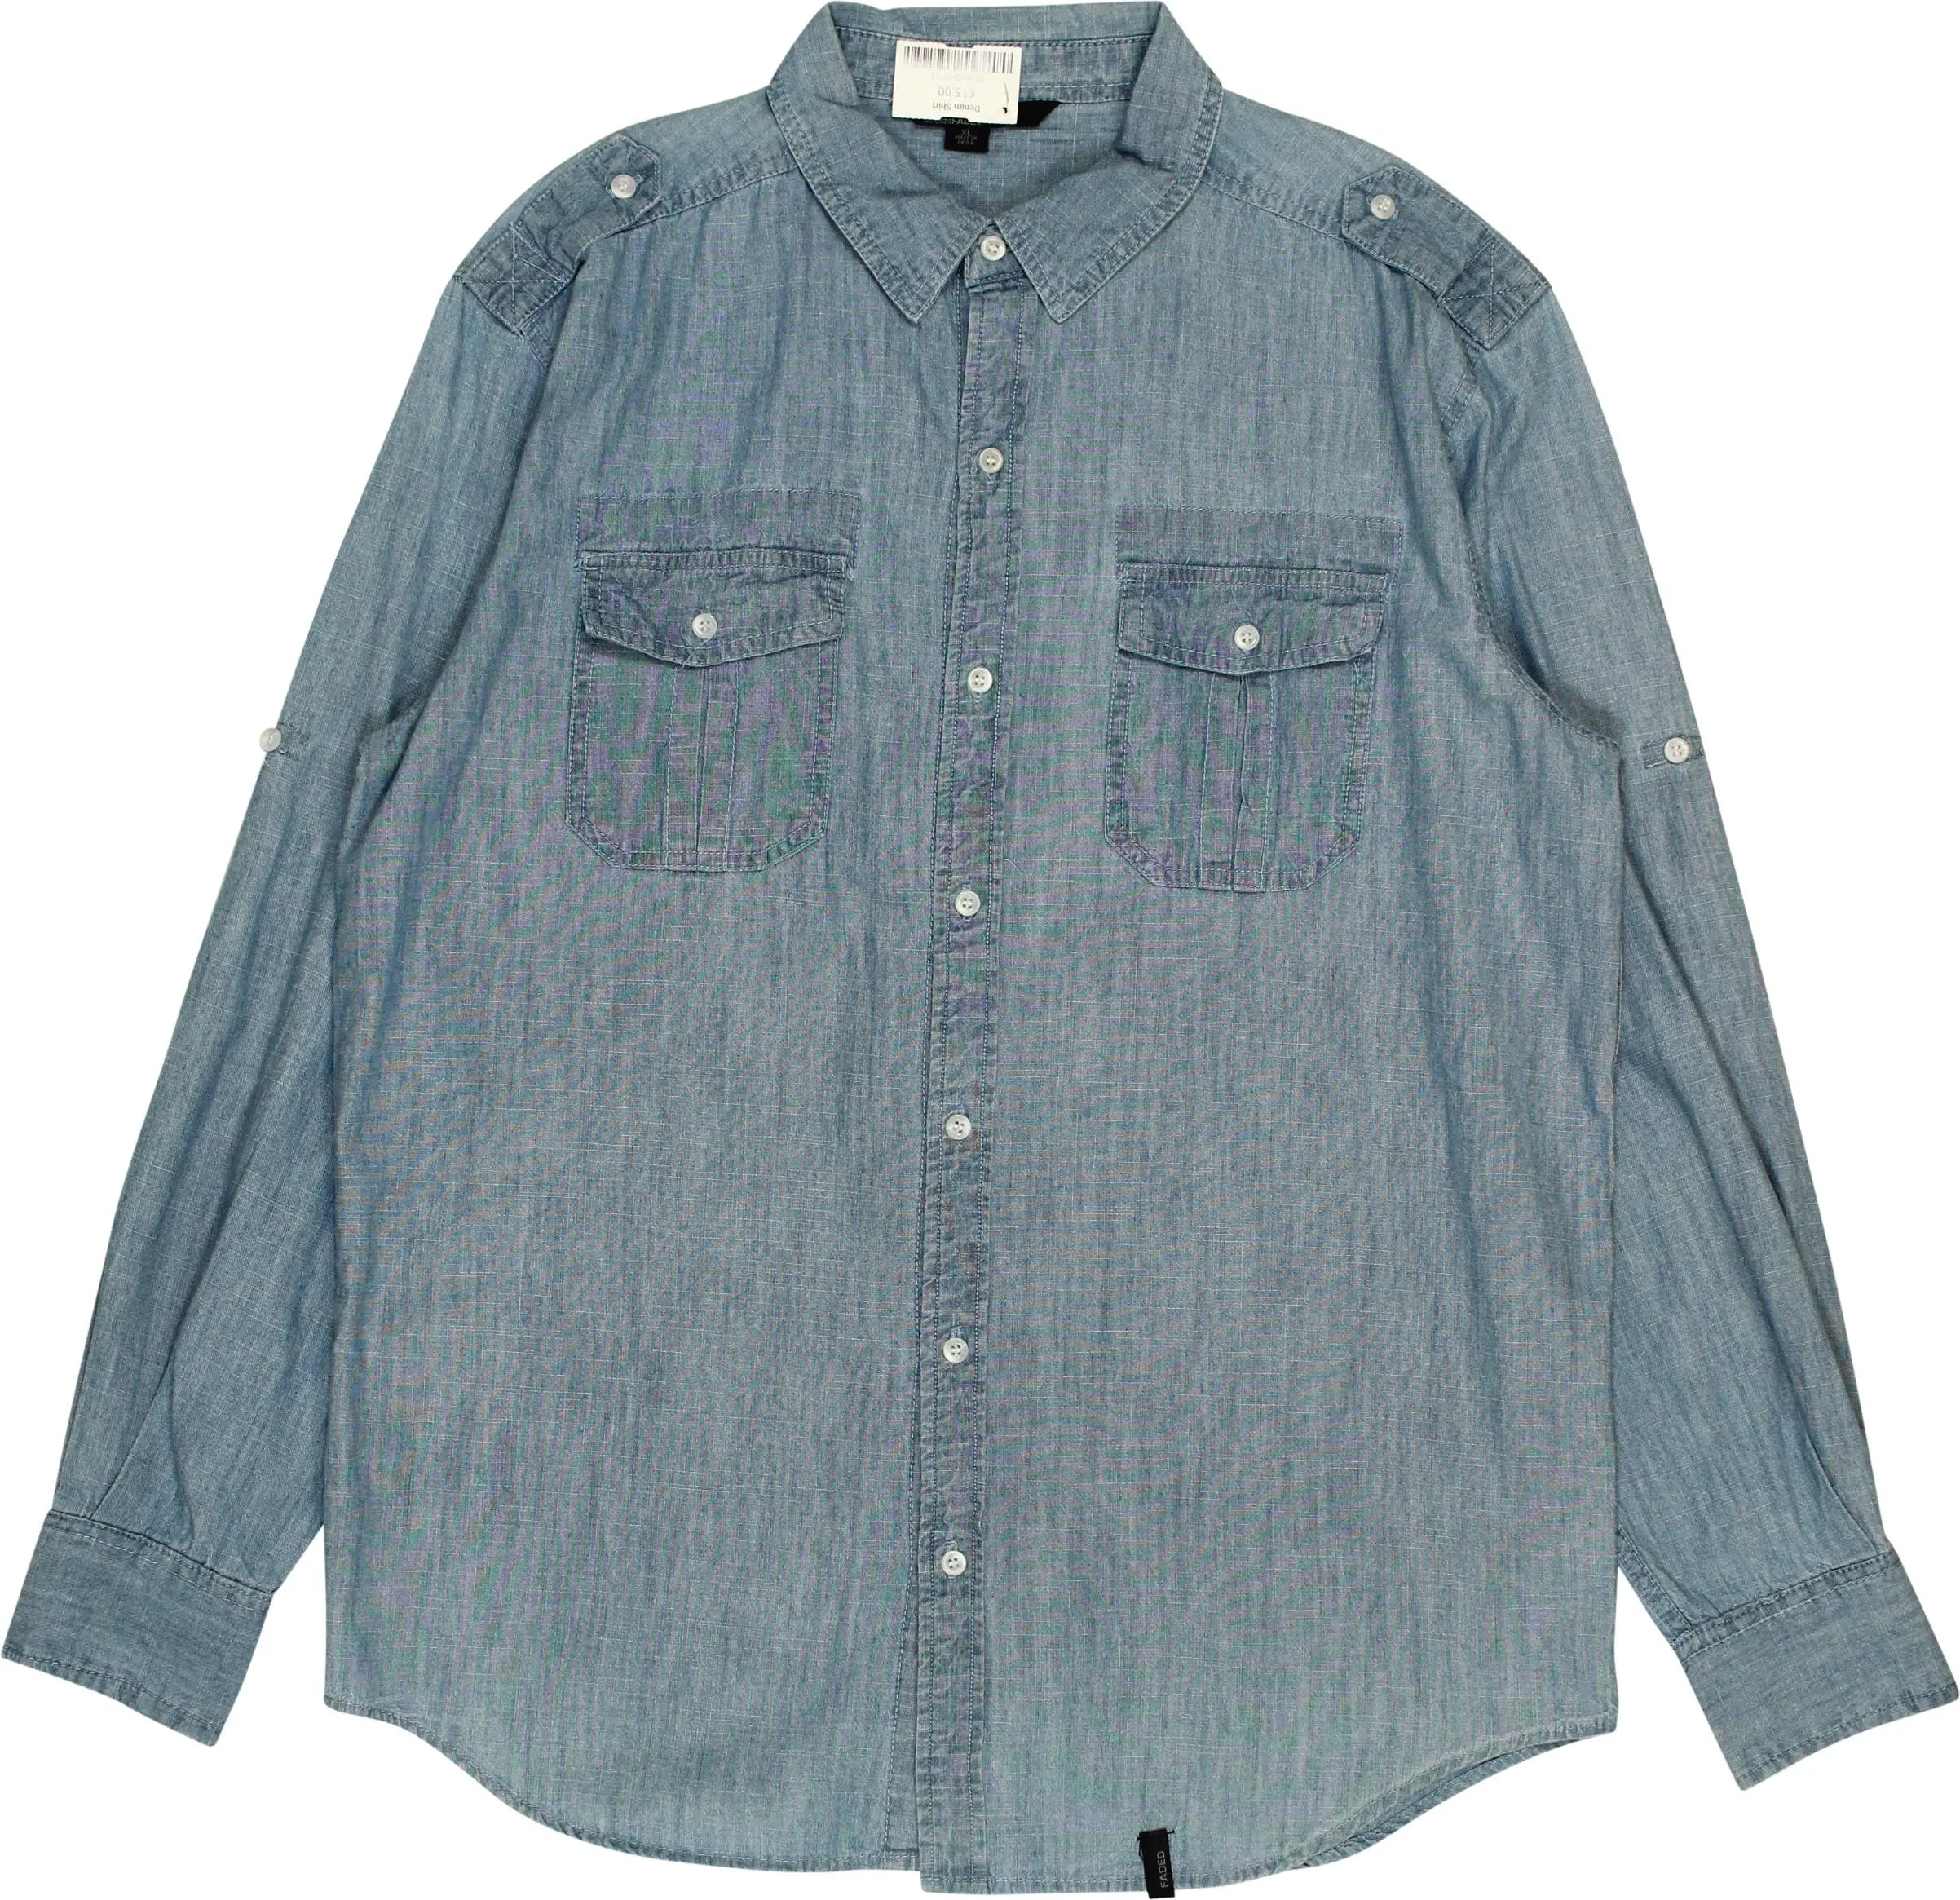 Unknown - Denim shirt- ThriftTale.com - Vintage and second handclothing